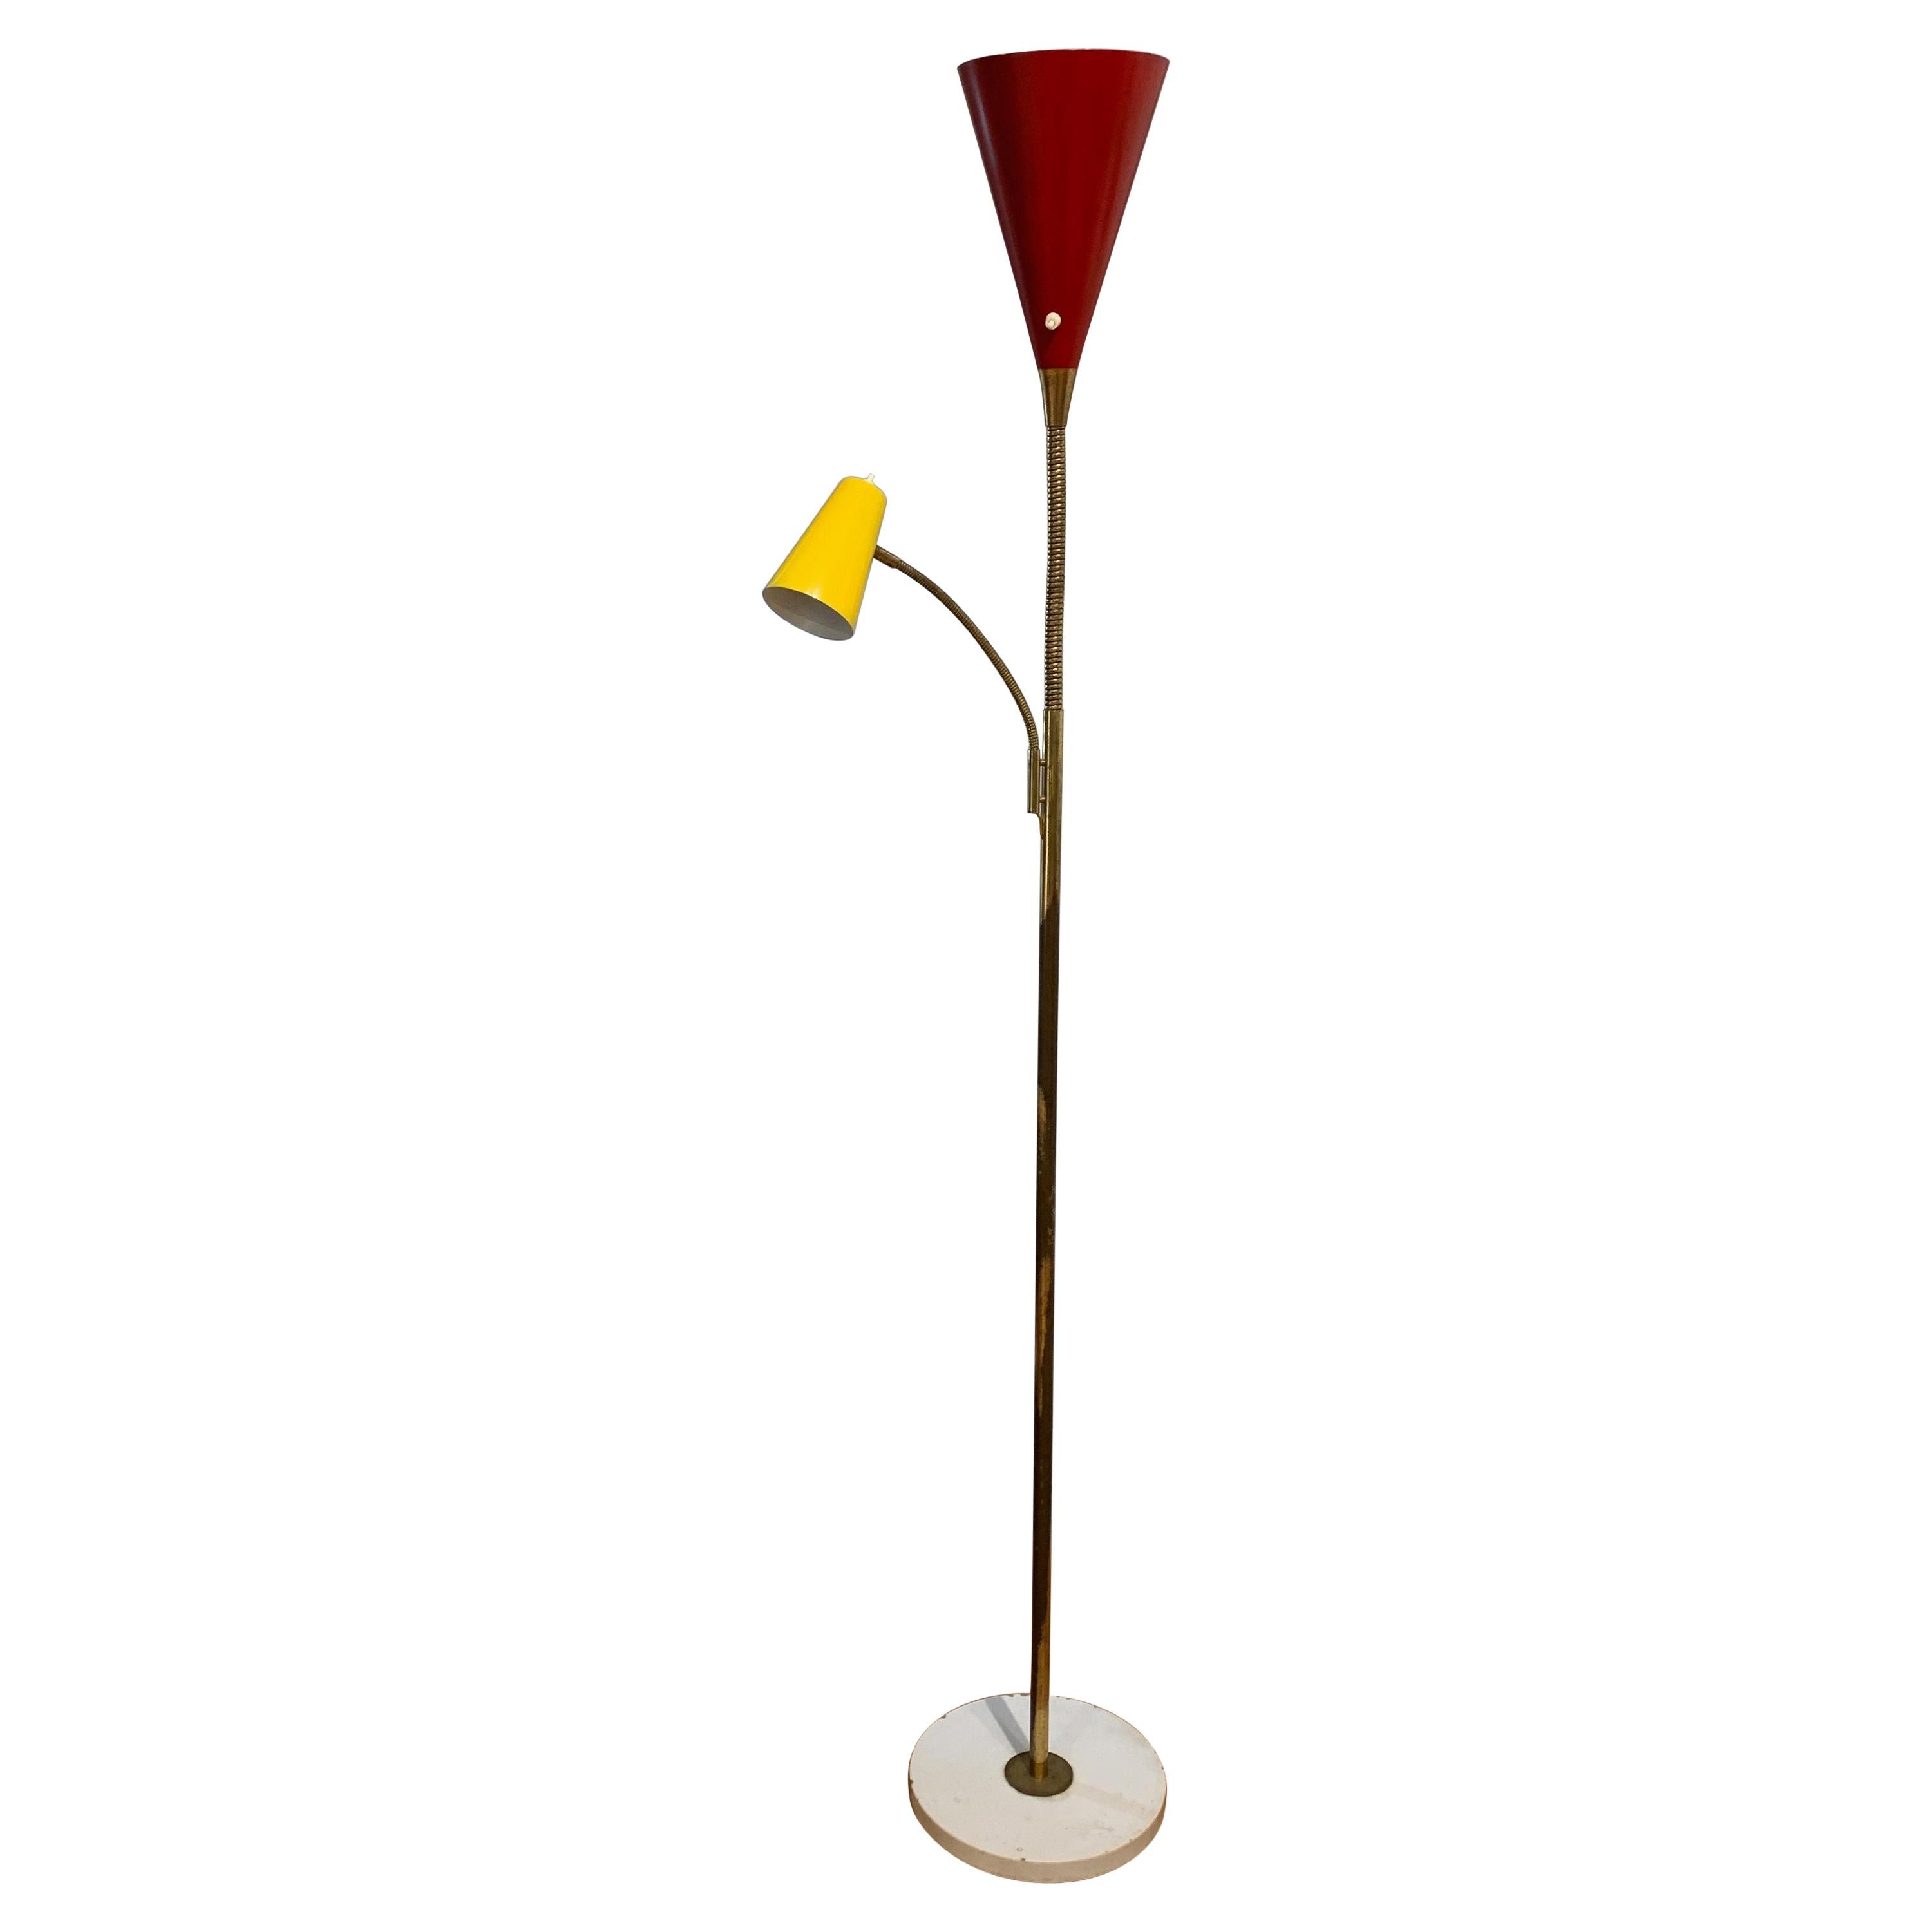 Gino Sarfatti Floor Lamp Model 1044, Made in Italy, 1952, Arteluce Production For Sale